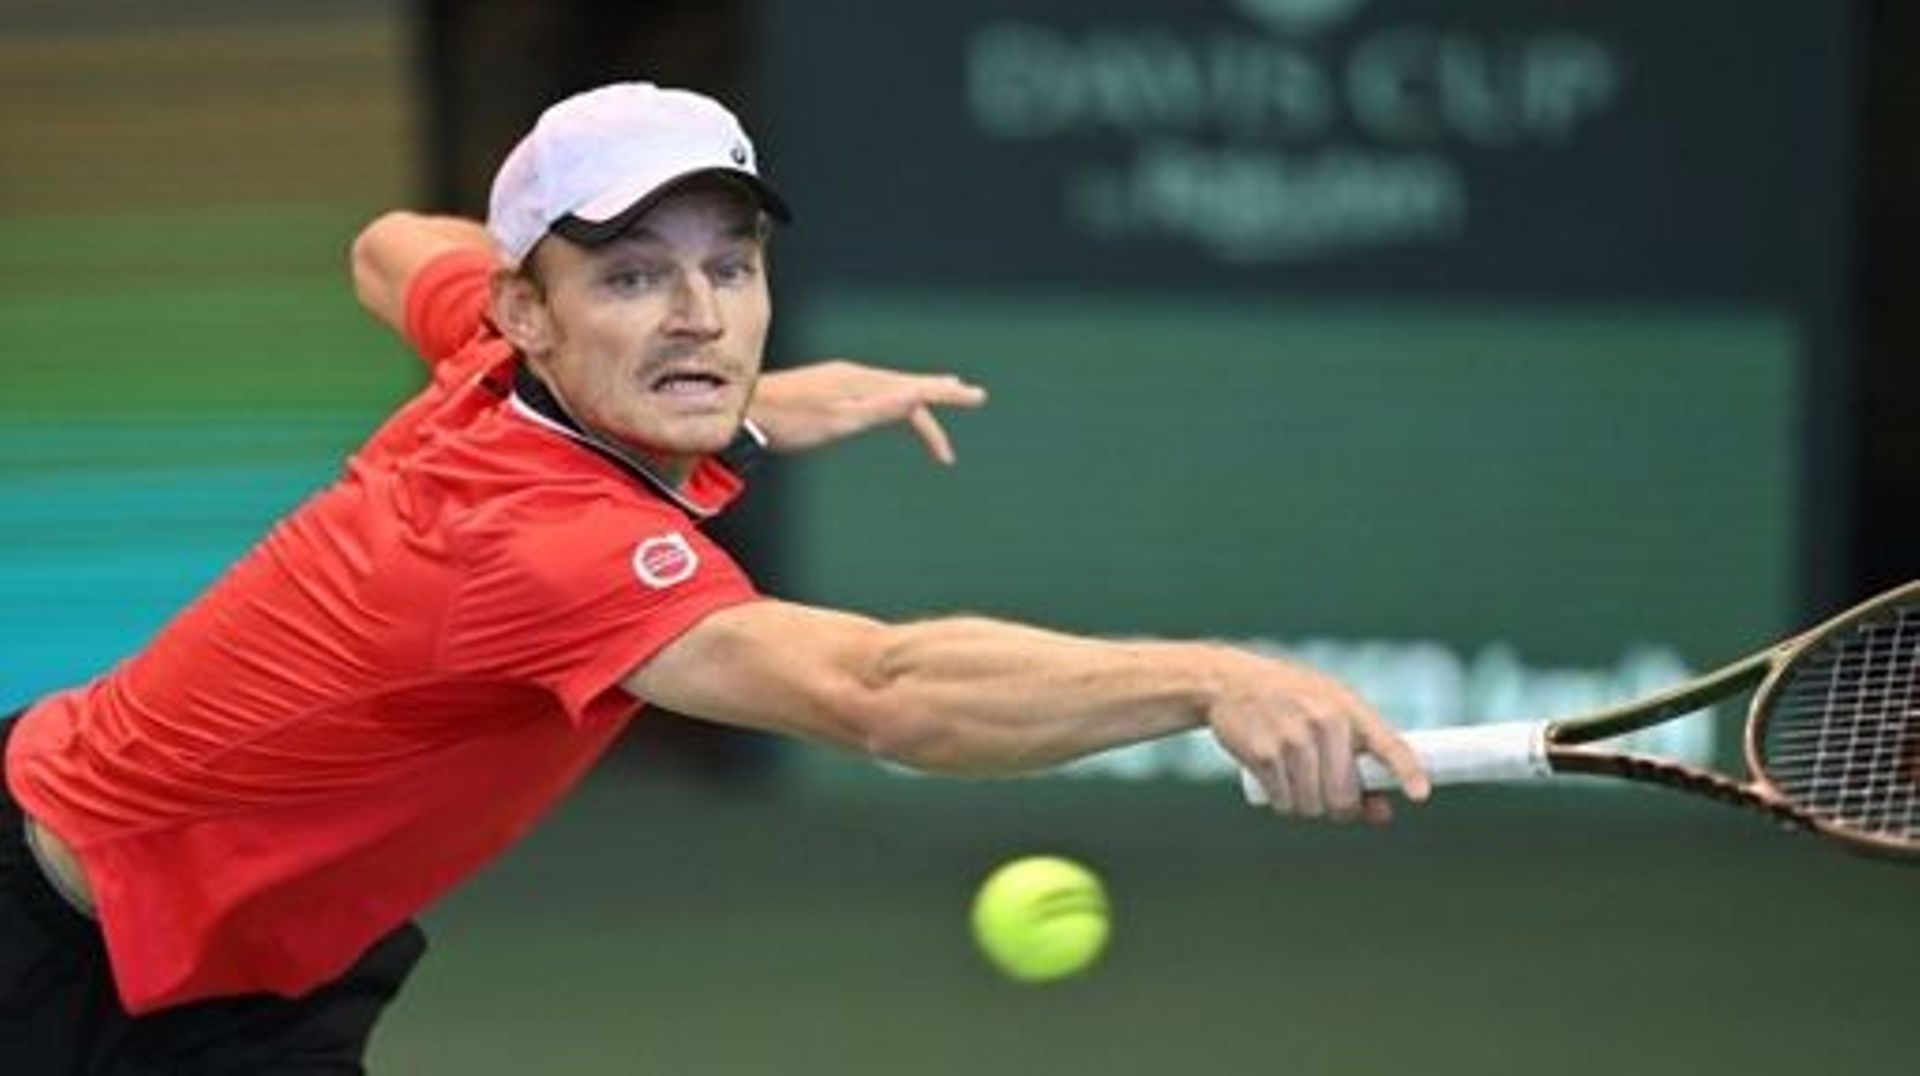 Belgium's David Goffin returns the ball against South Korea's Kwon Soon-woo during their singles match of the Davis Cup tennis qualifiers first round between South Korea and Belgium in Seoul on February 5, 2023.  Jung Yeon-je / AFP